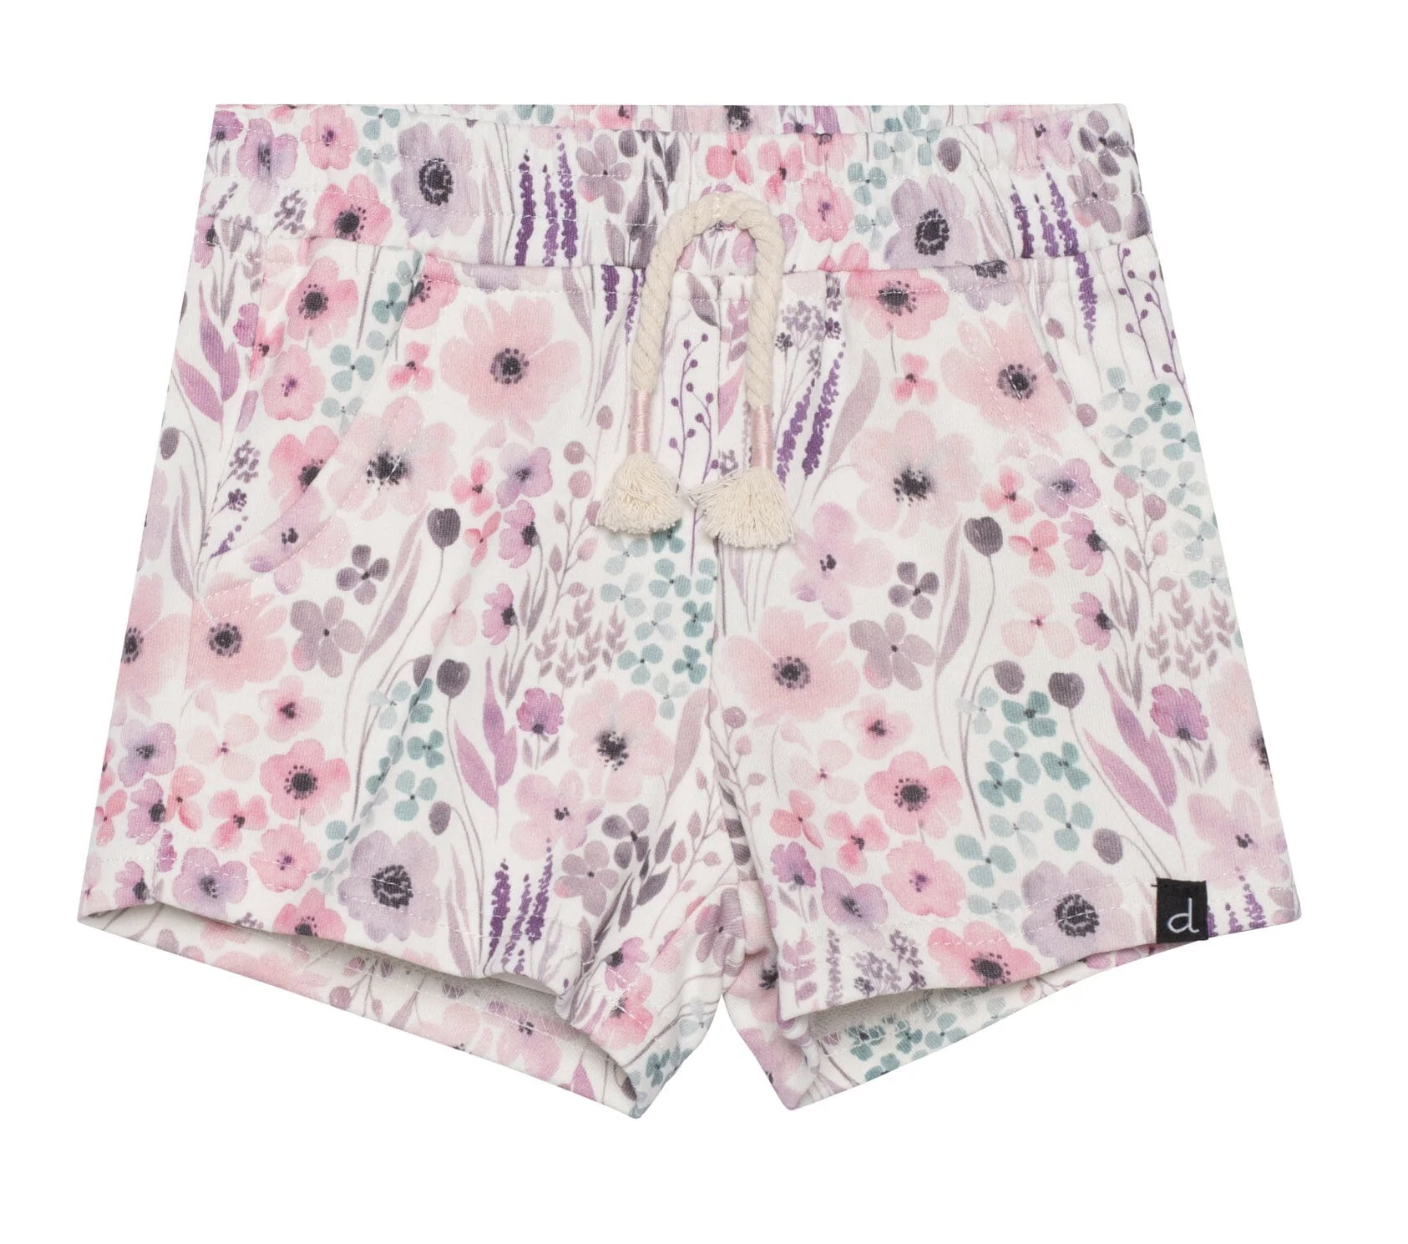 Watercolor flowers printed shorts w/pockets